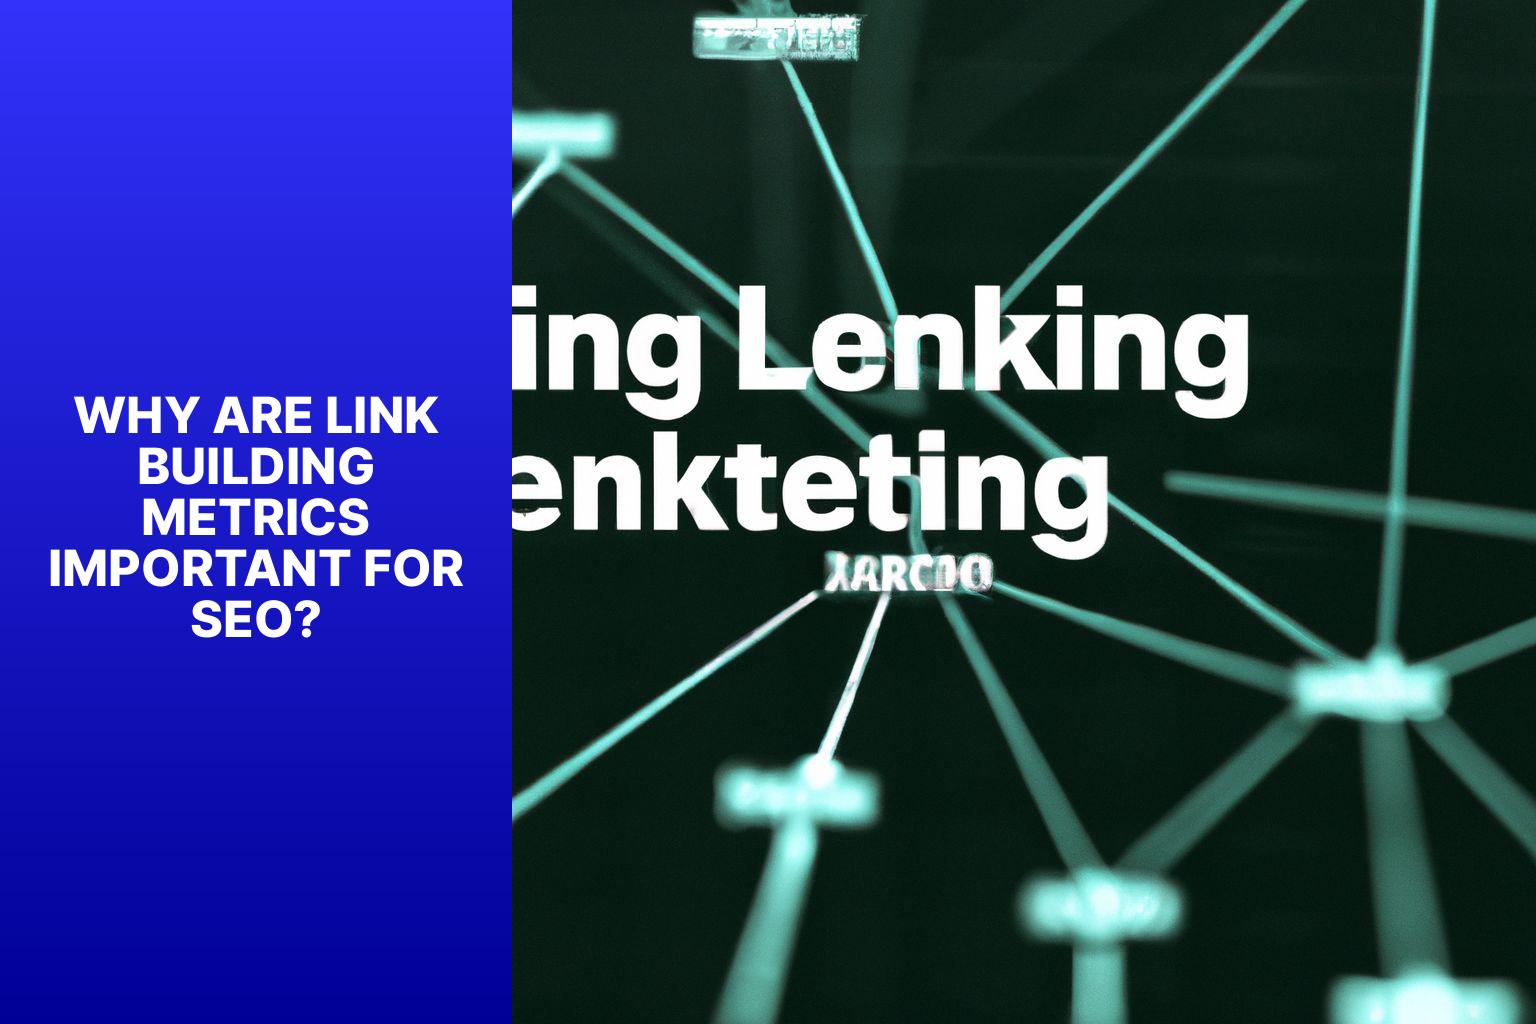 Why are Link Building Metrics Important for SEO? - Link Building Metrics Every SEO Pro Should Monitor 